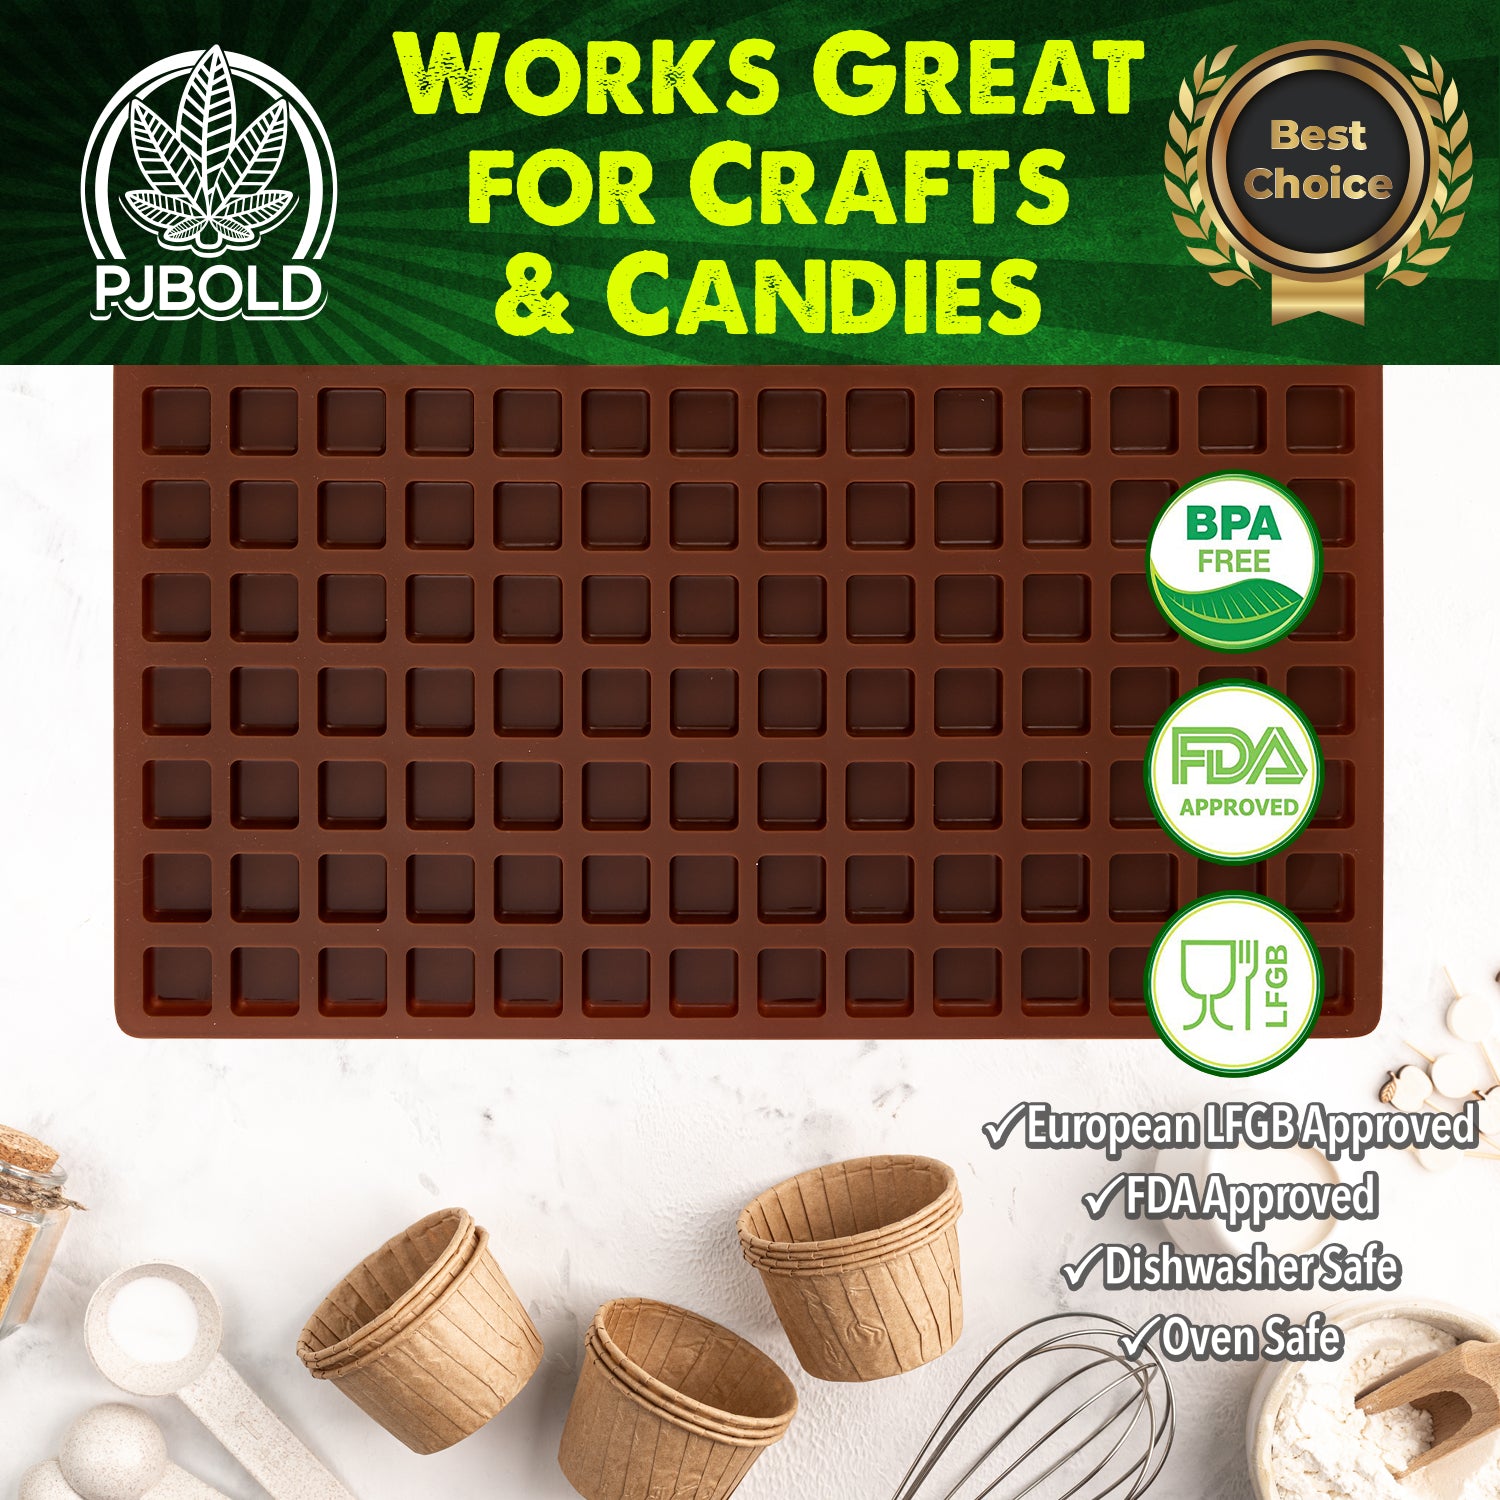 Square Candy Mold - Half Sheet